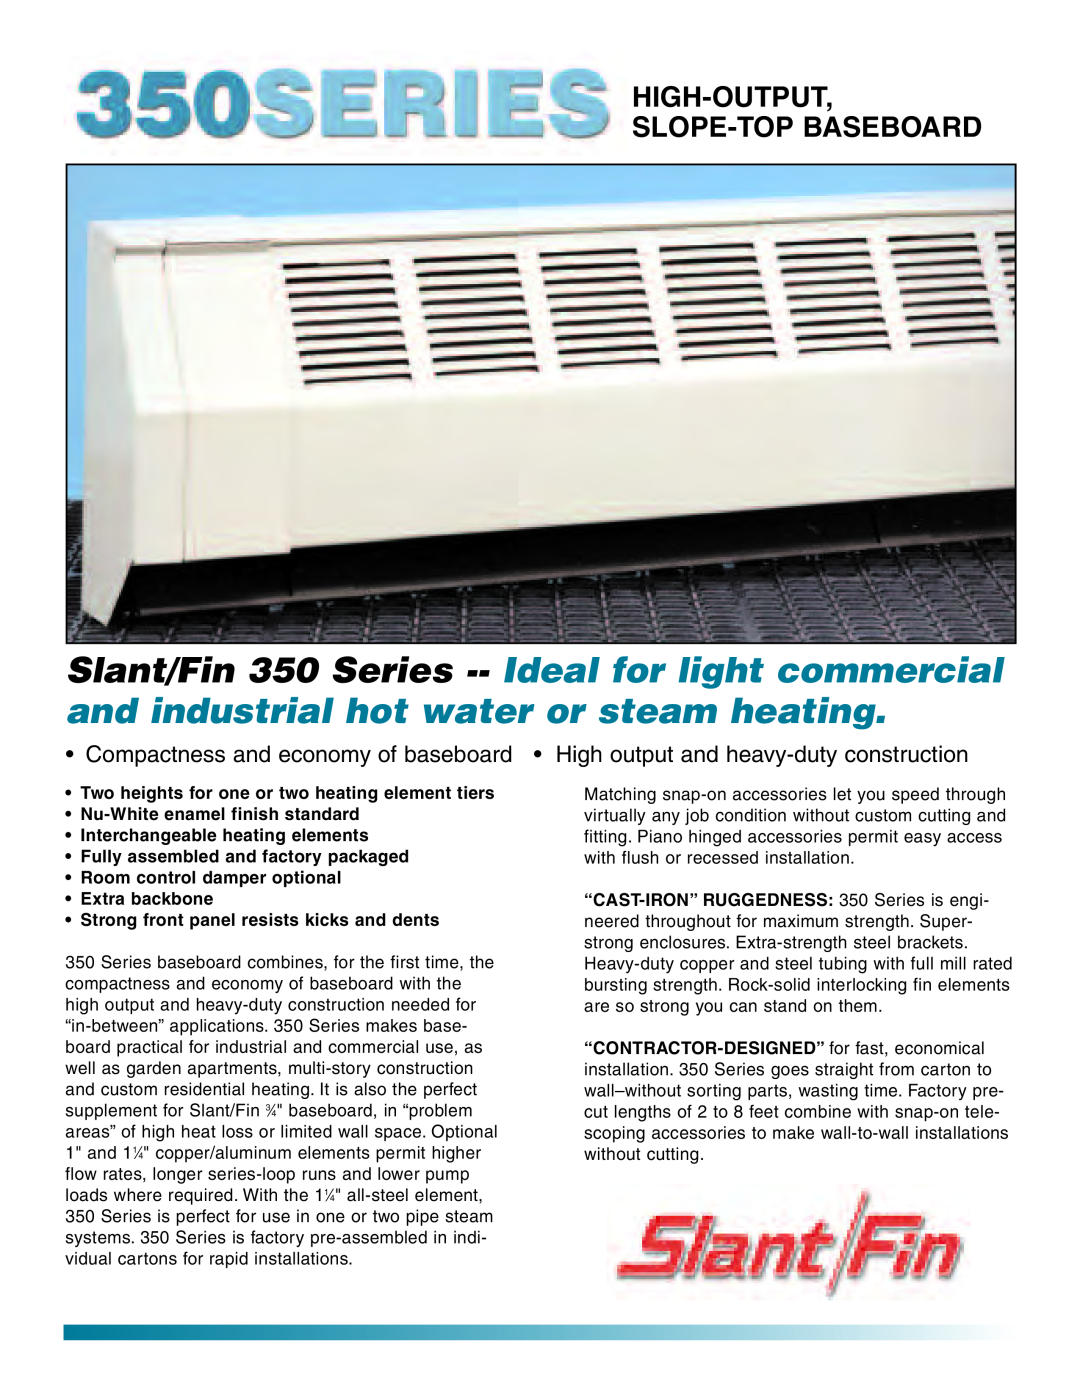 Slant/Fin 350 Series manual High-Output Slope-Topbaseboard 